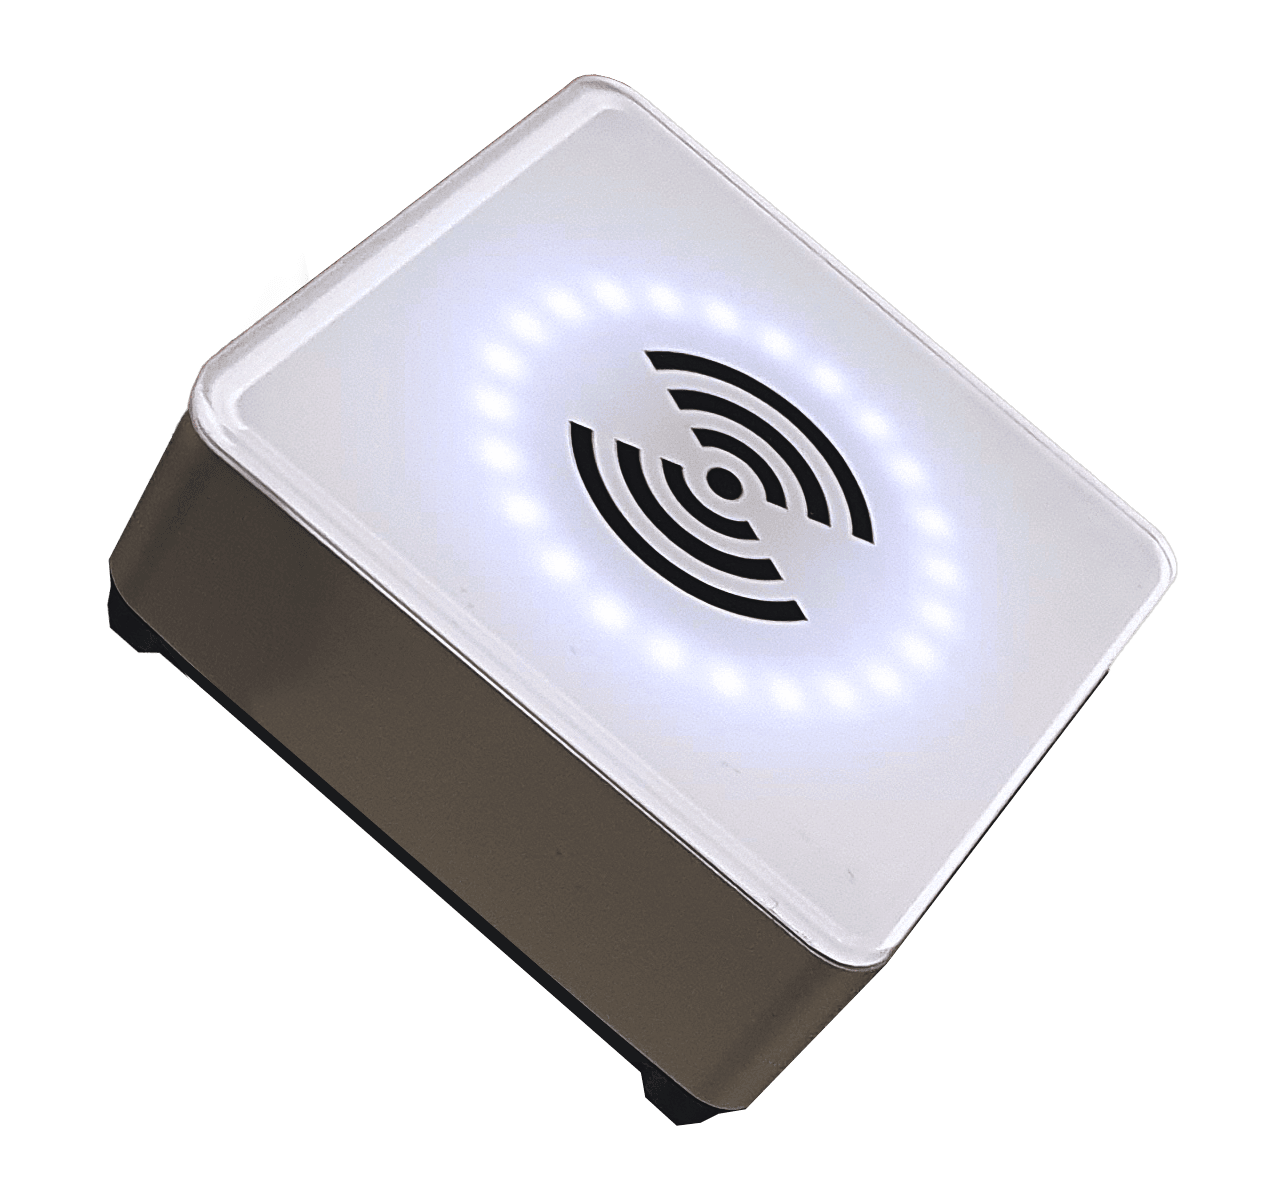 rfid reader chassis with led ring, programmable led lights and colors